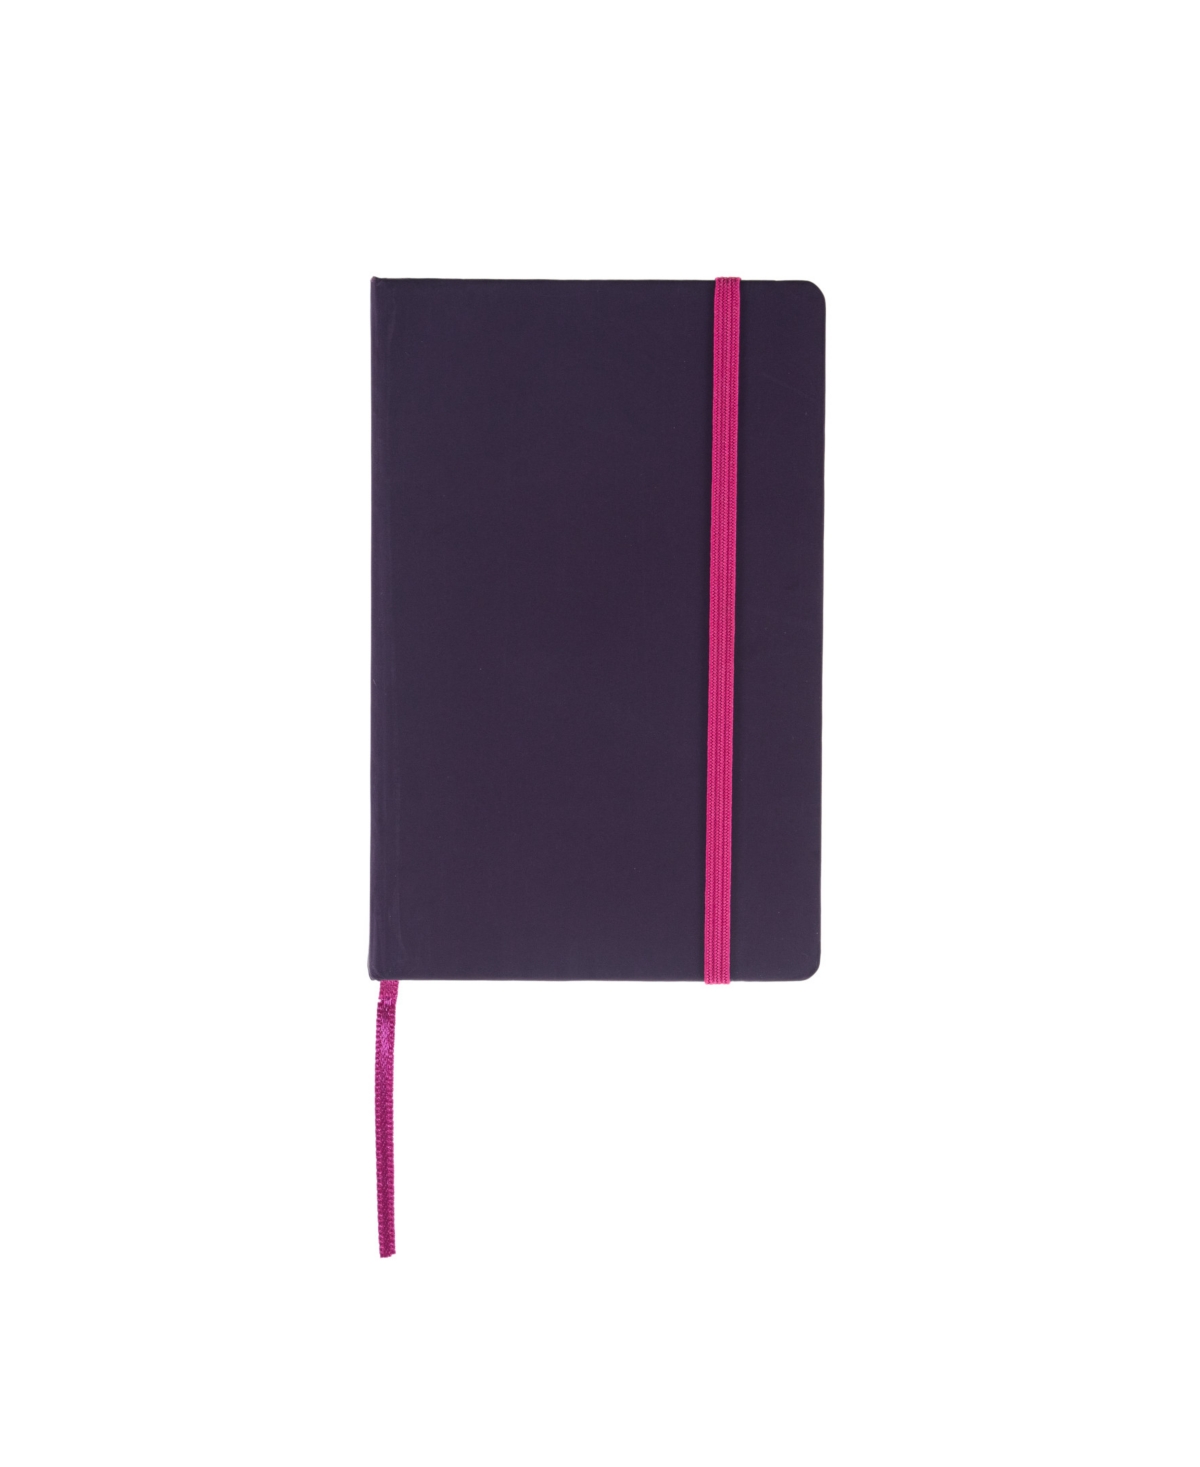 Ispira Hard Cover Dotted Notebook, 3.5" x 5.5" - Purple